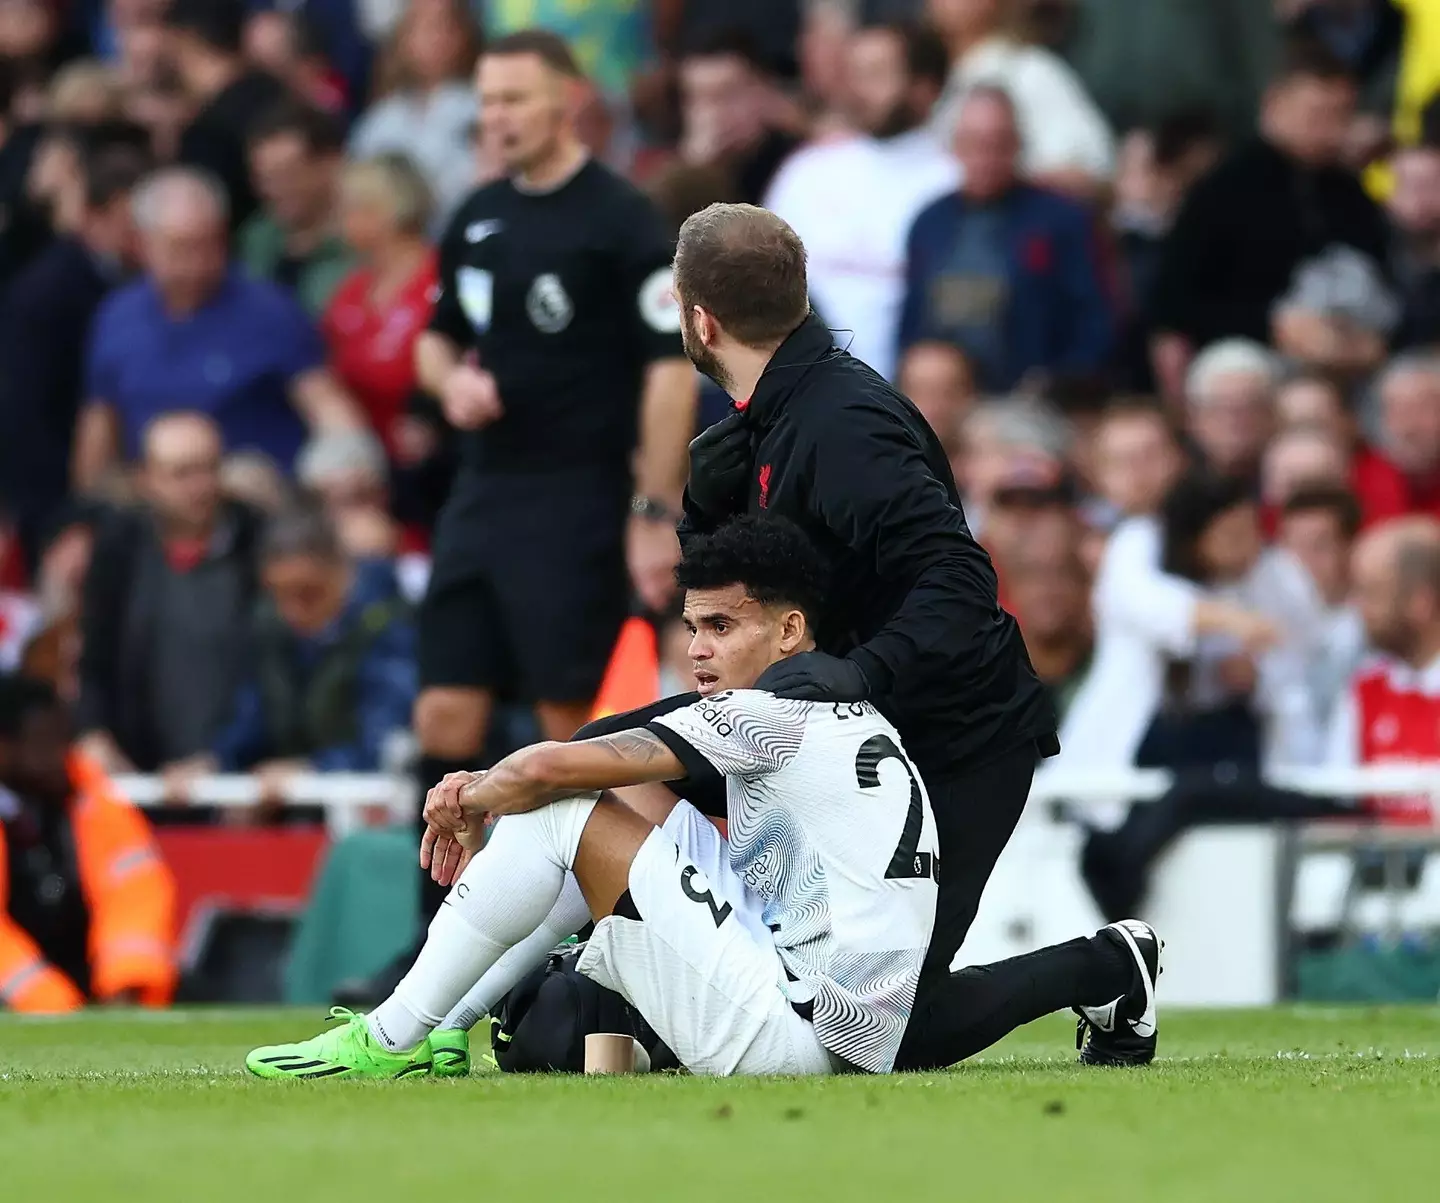 Diaz sits on the pitch before being helped off due to his injury. Image: Alamy